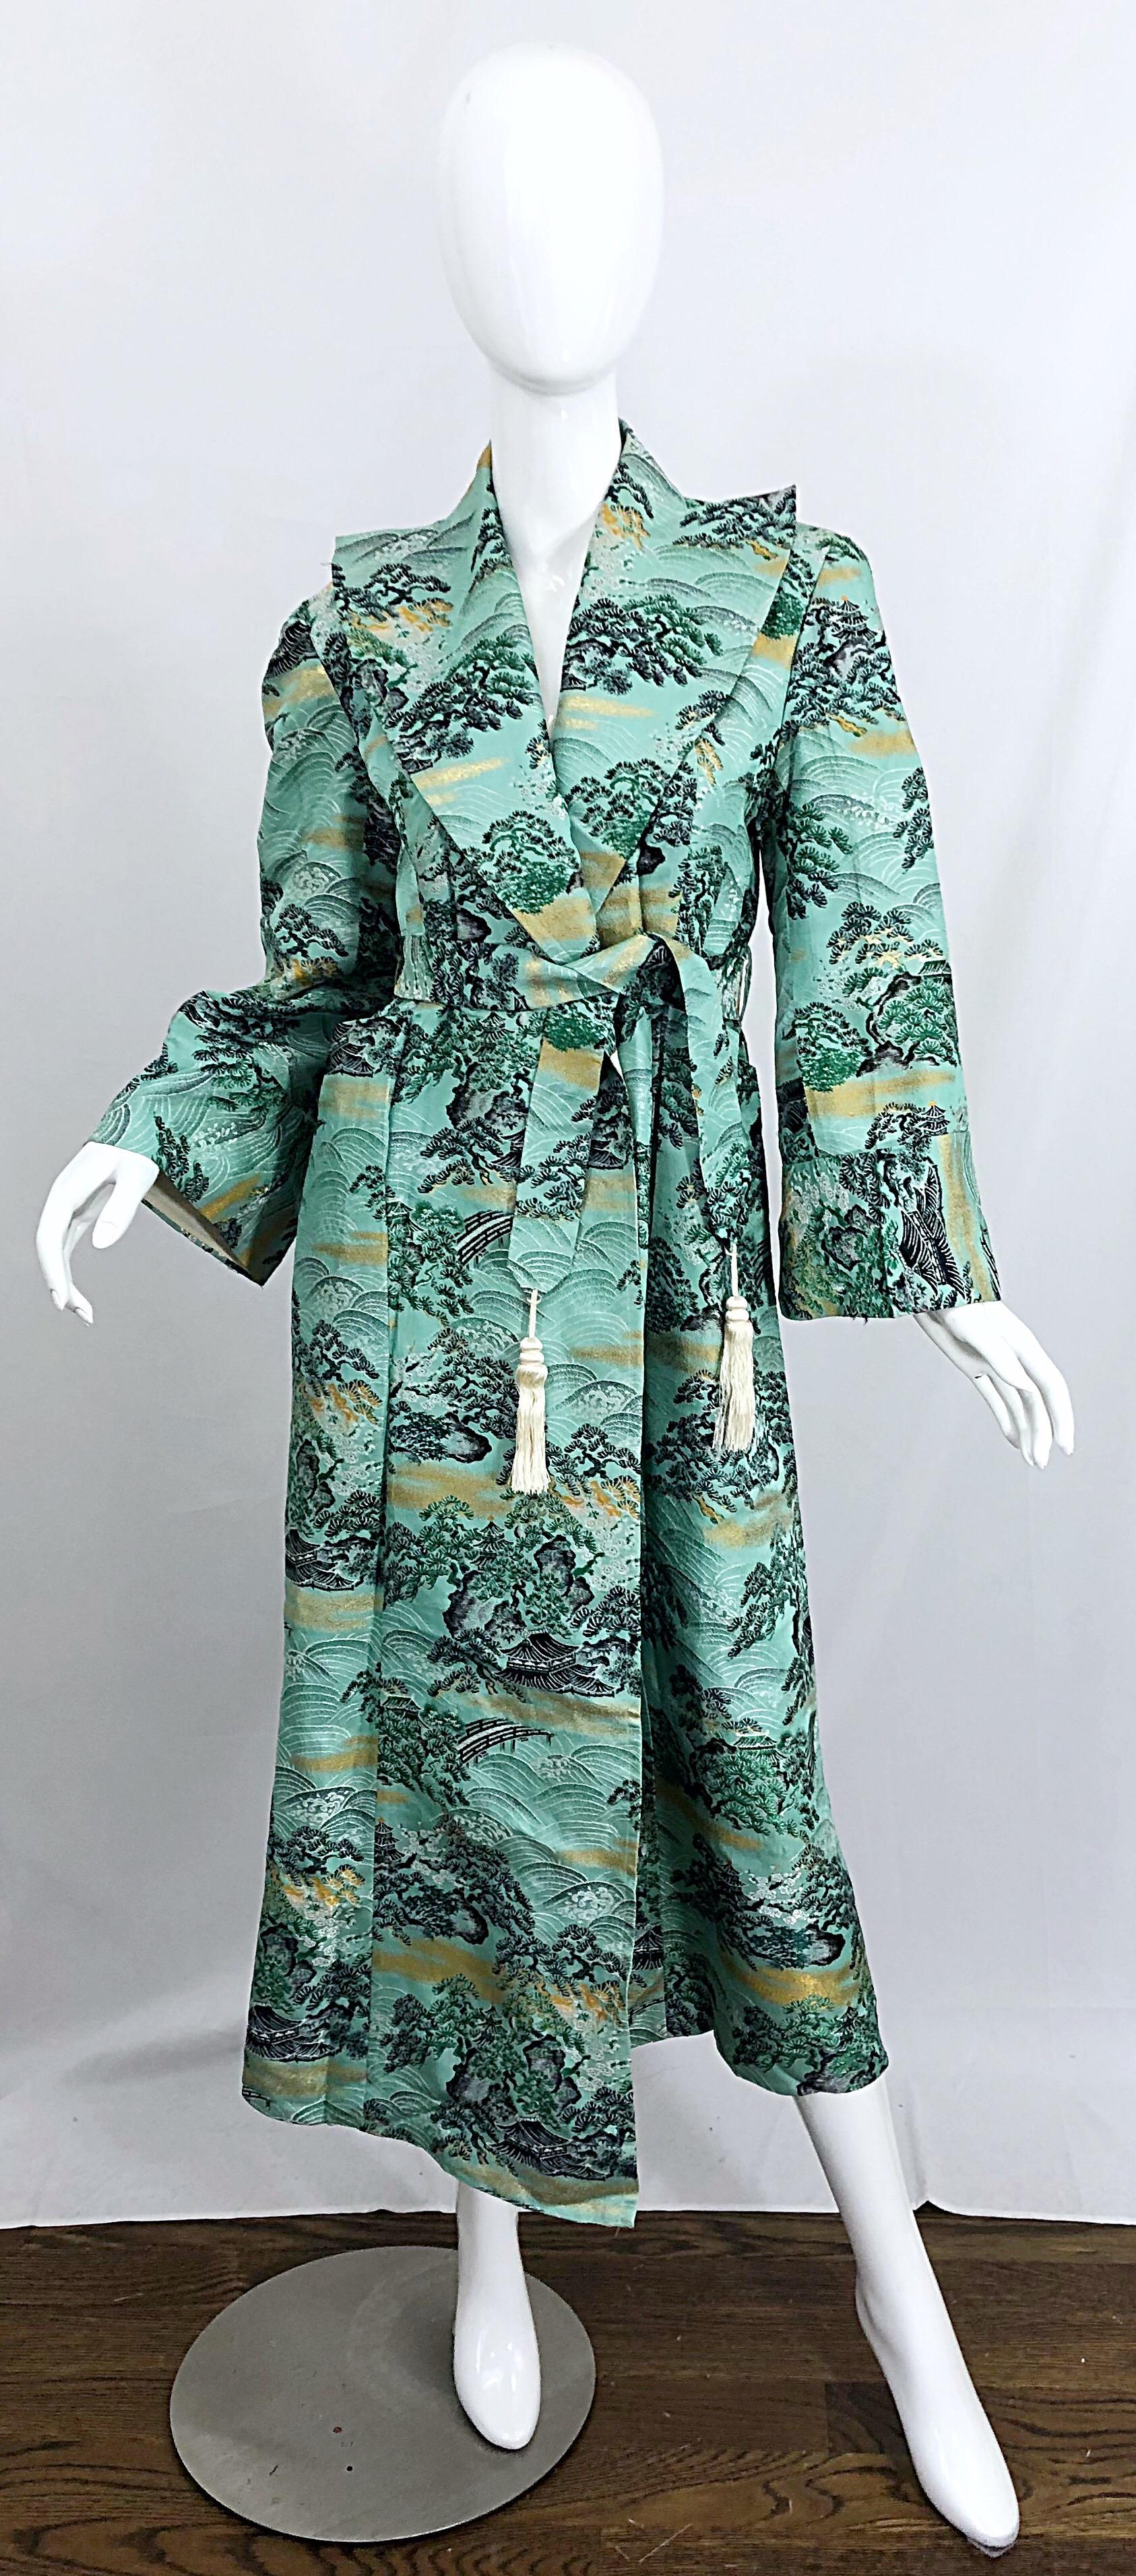 Amazing 1940s FUJIBAYASHI blue, green and gold novelty print vintage silk brocade jacket! Features trees and landscapes / mountains printed throughout. Detachable fringe belt makes this jacket easy to wear by multiple sizes. Trench silhouette with